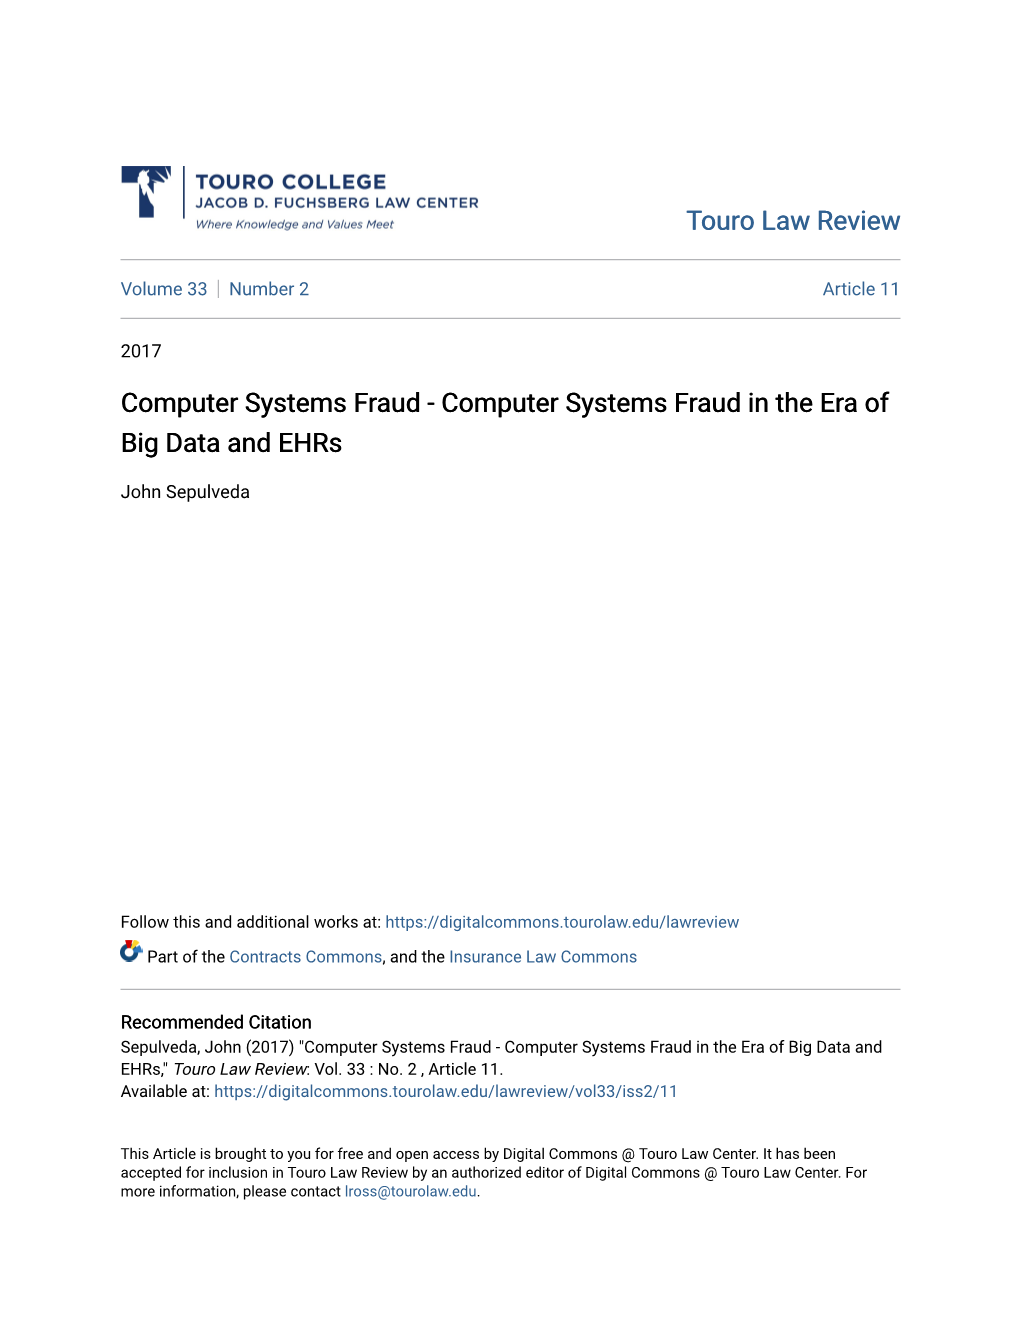 Computer Systems Fraud - Computer Systems Fraud in the Era of Big Data and Ehrs